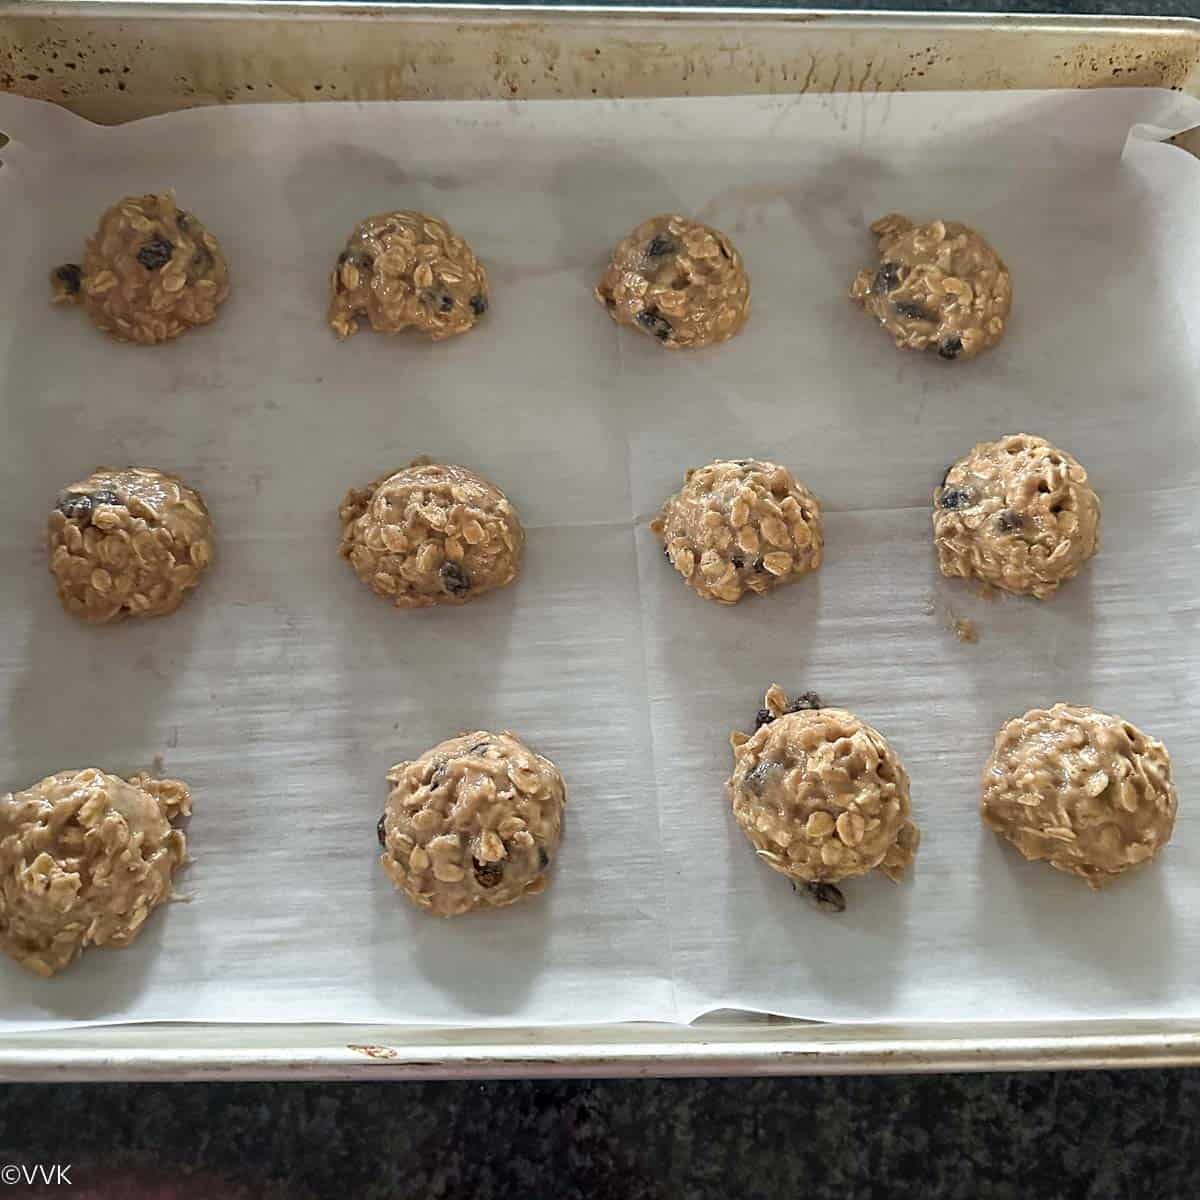 placing the cookies on baking tray